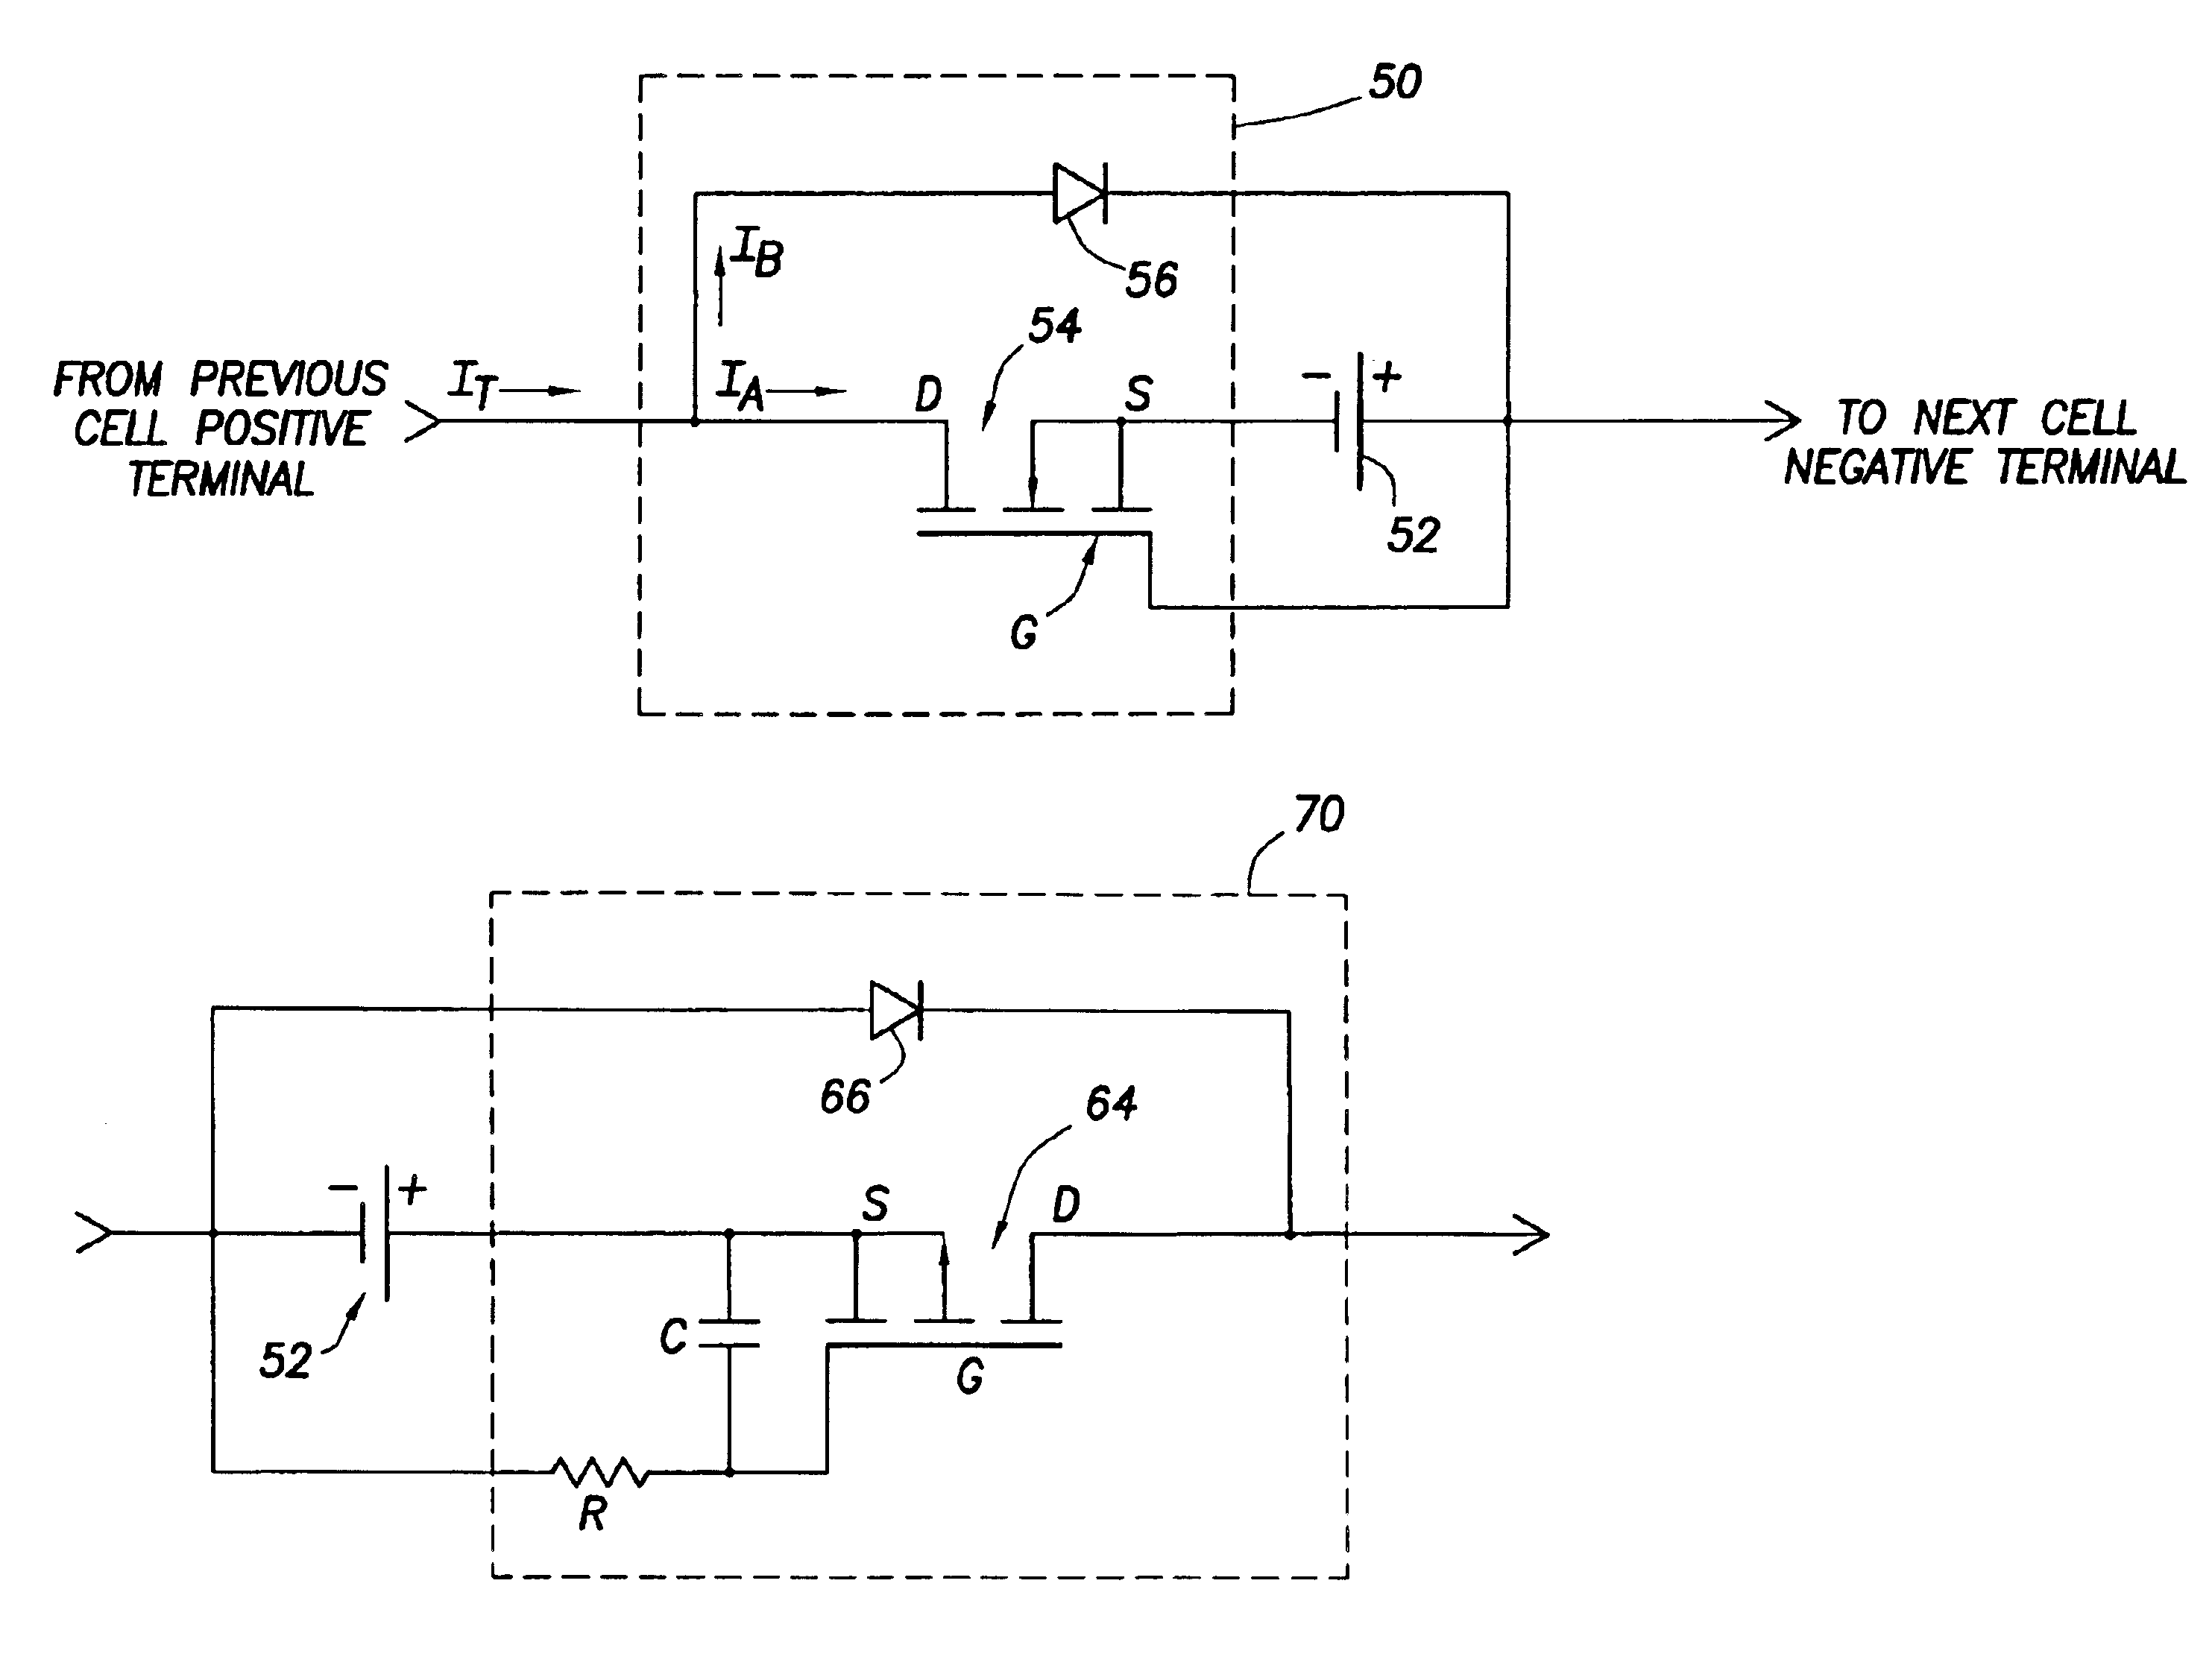 Protection circuit for a battery cell